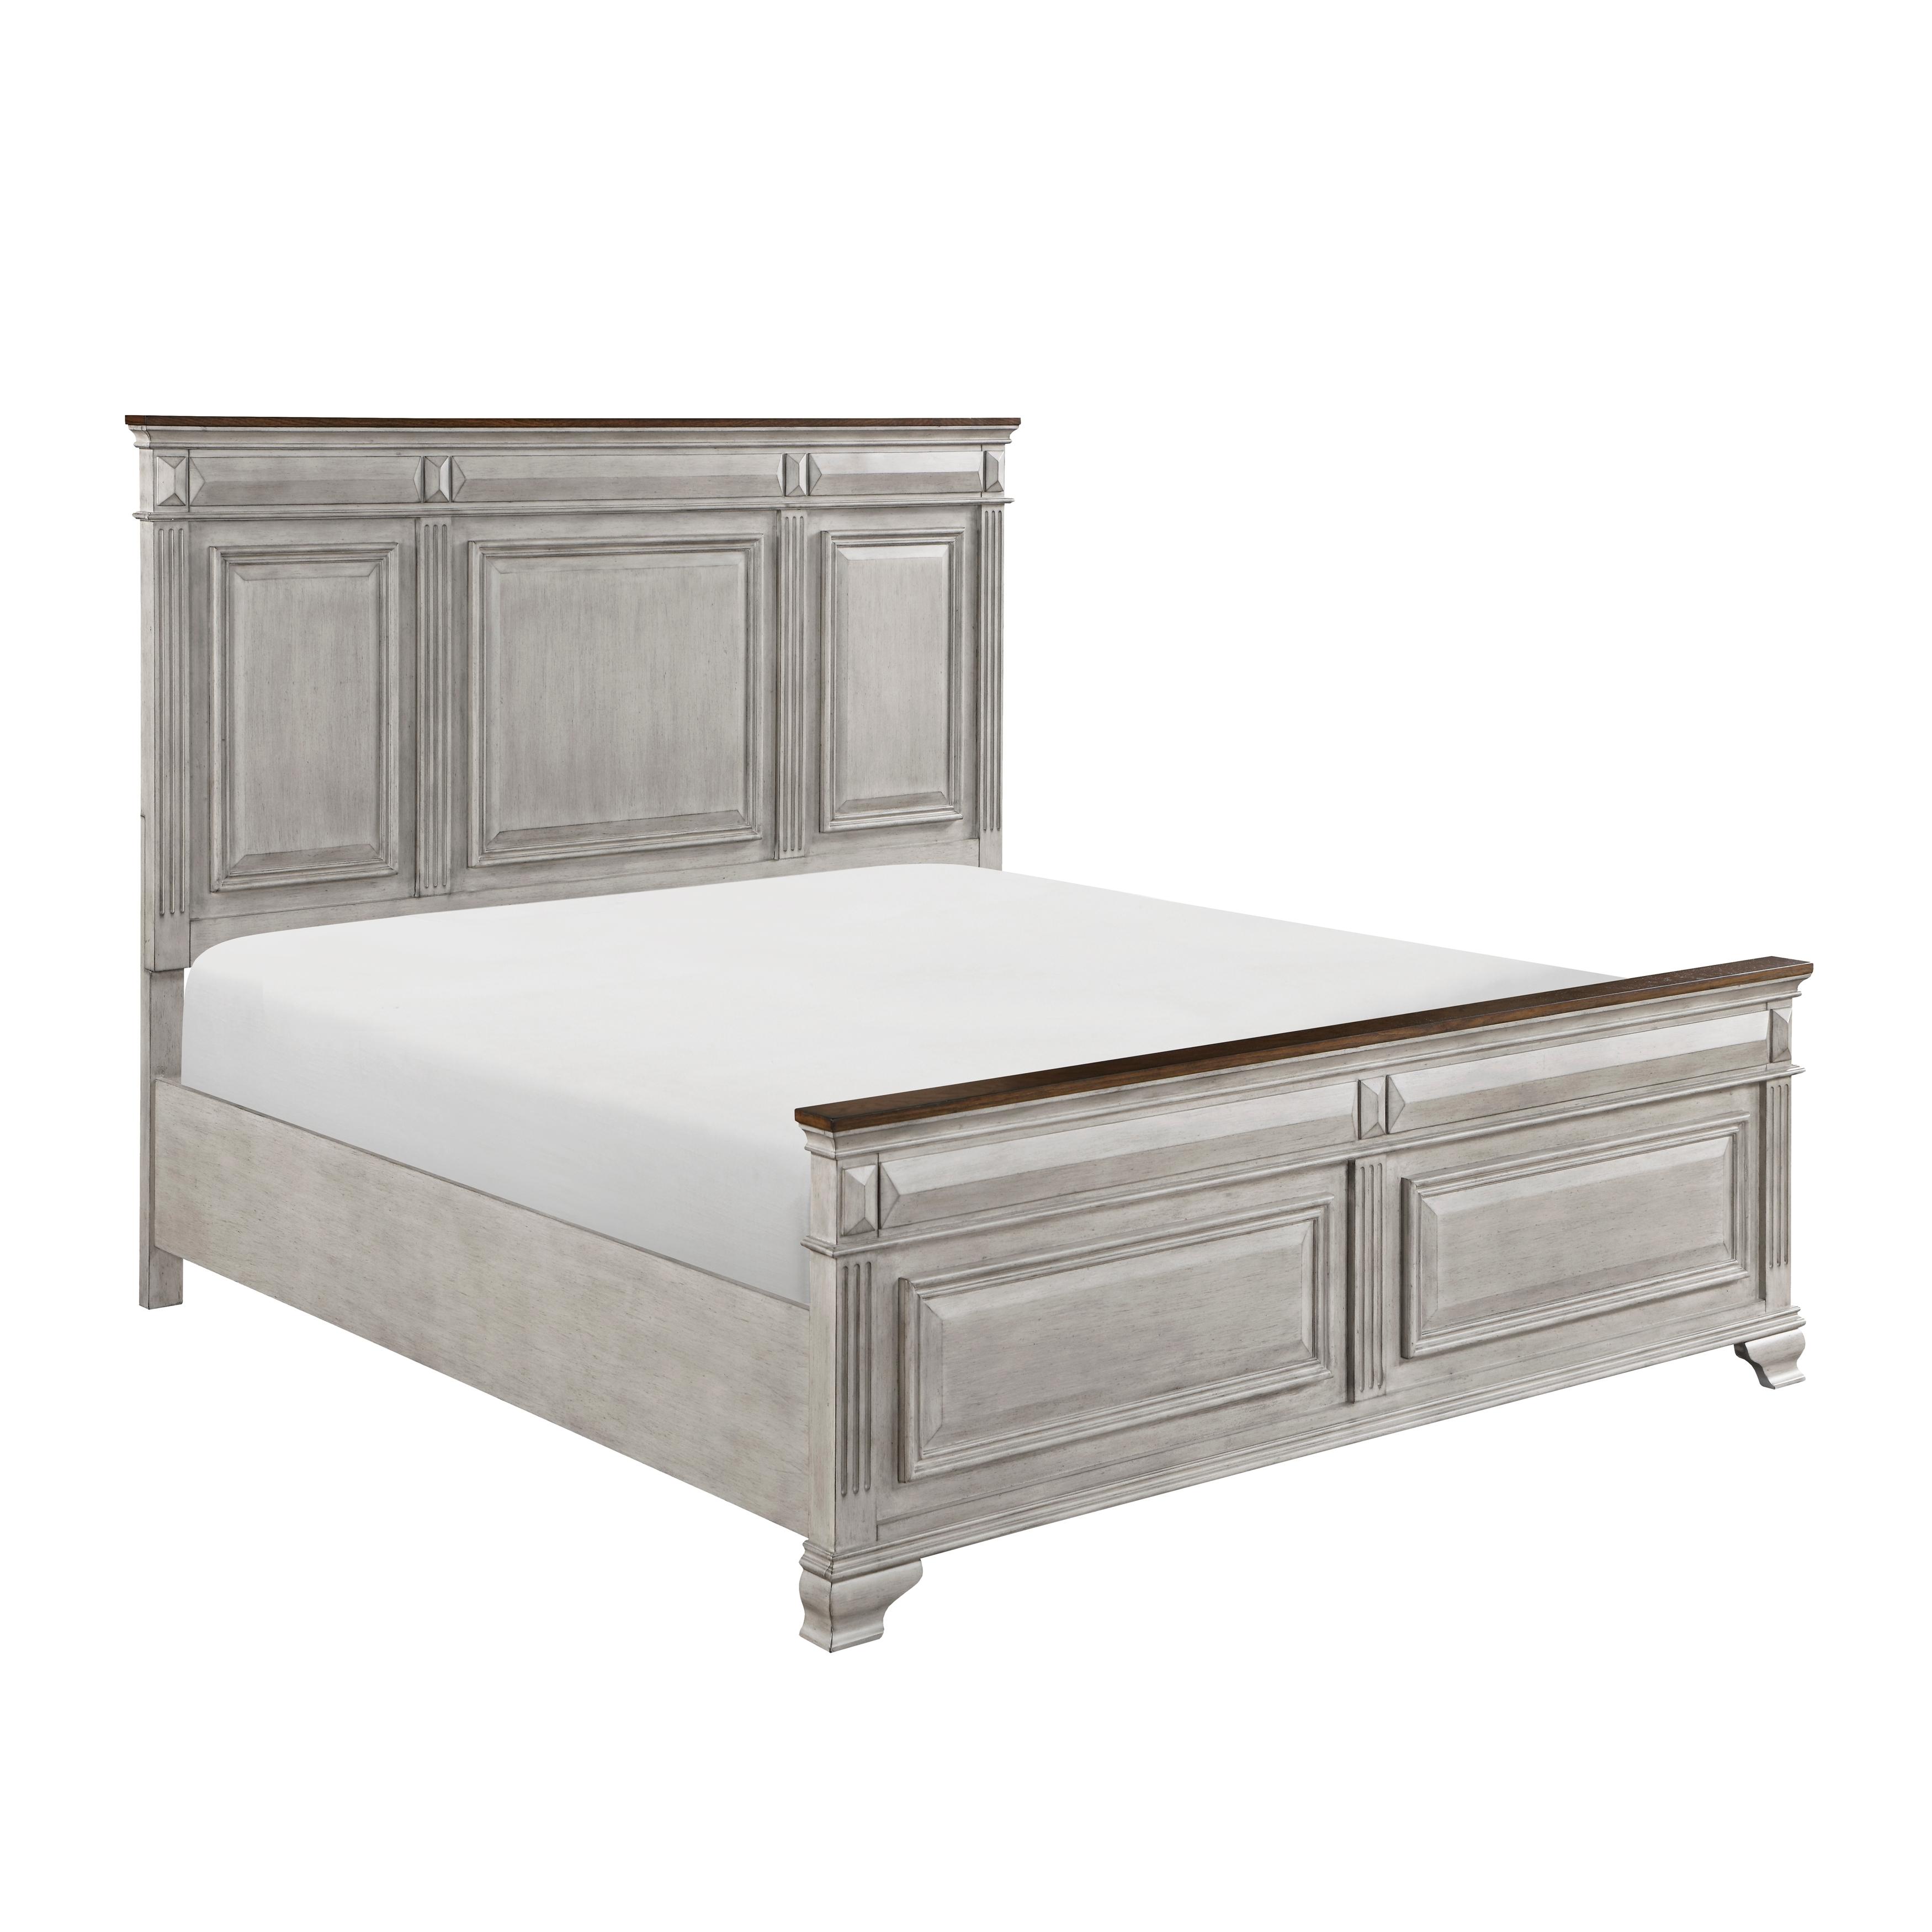 Traditional Panel Bed Marquette California King Bed 1449K-1CK-CK 1449K-1CK-CK in Gray, Brown 